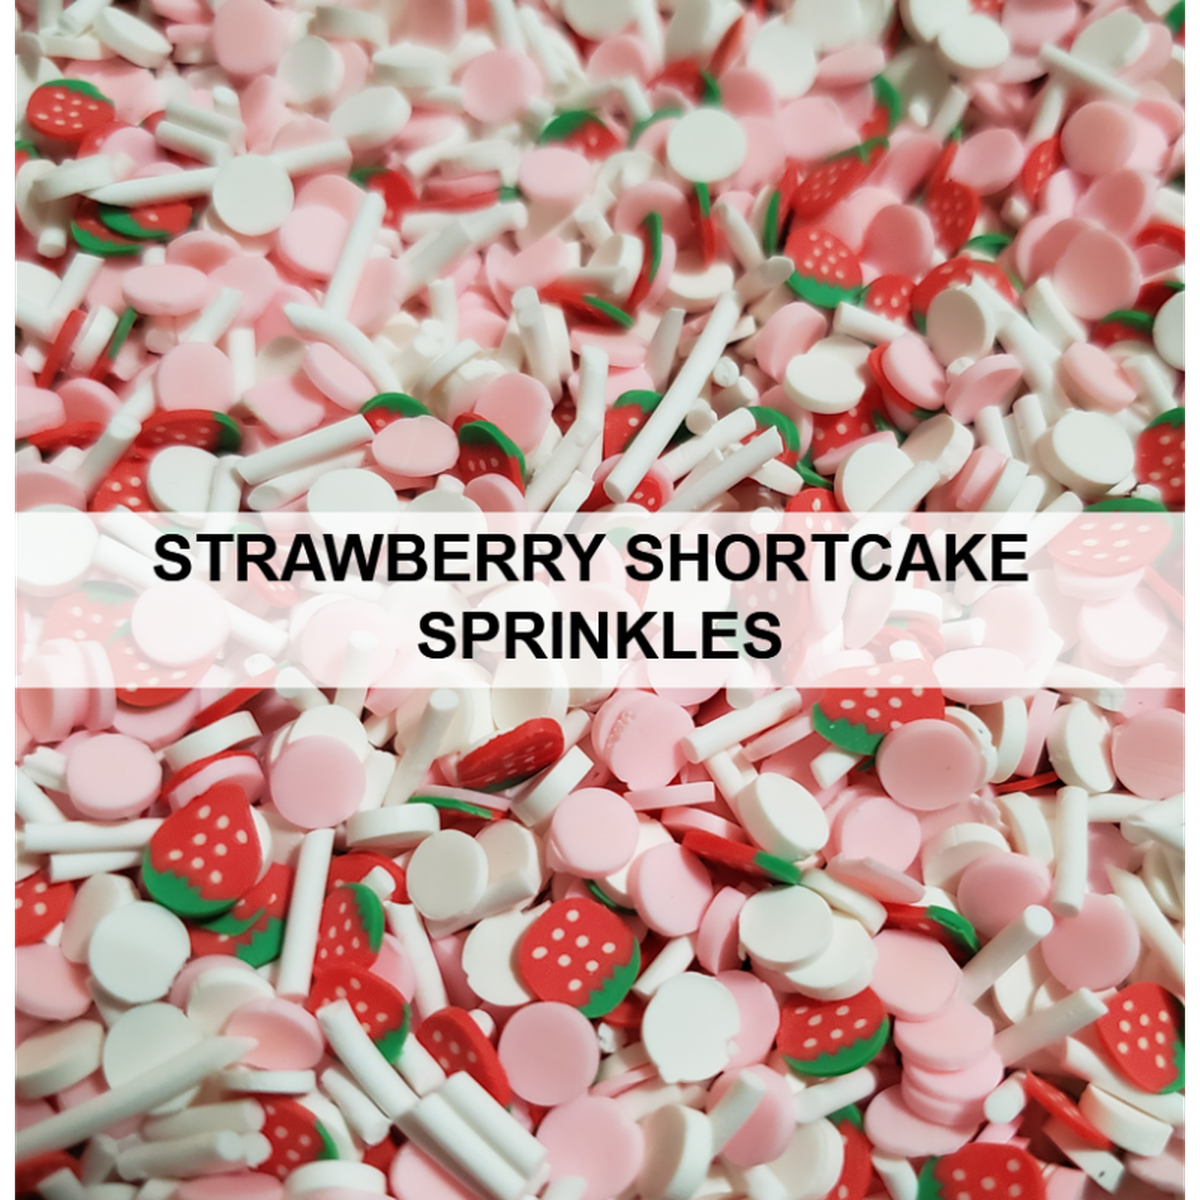 Strawberry Shortcake Sprinkles by Kat Scrappiness - Kat Scrappiness